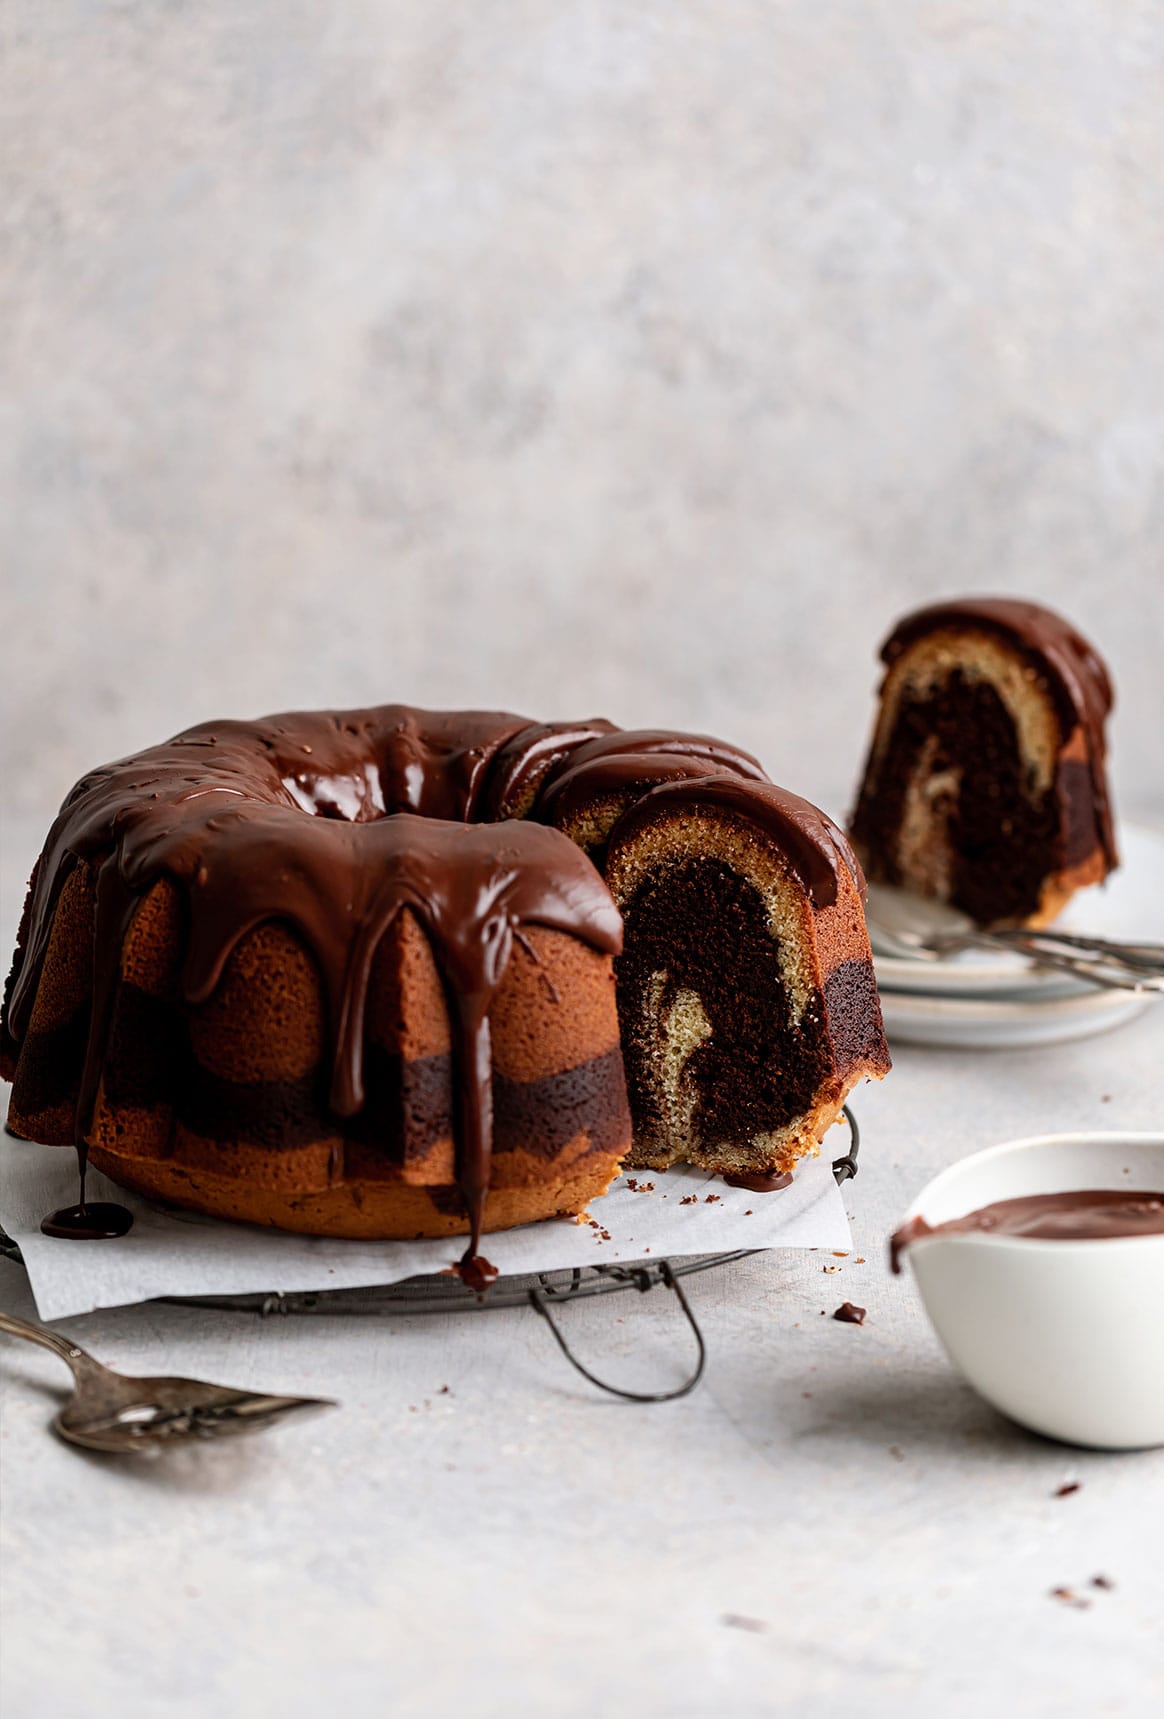 https://yogaofcooking.co/wp-content/uploads/2020/03/marble-cake-5.jpg